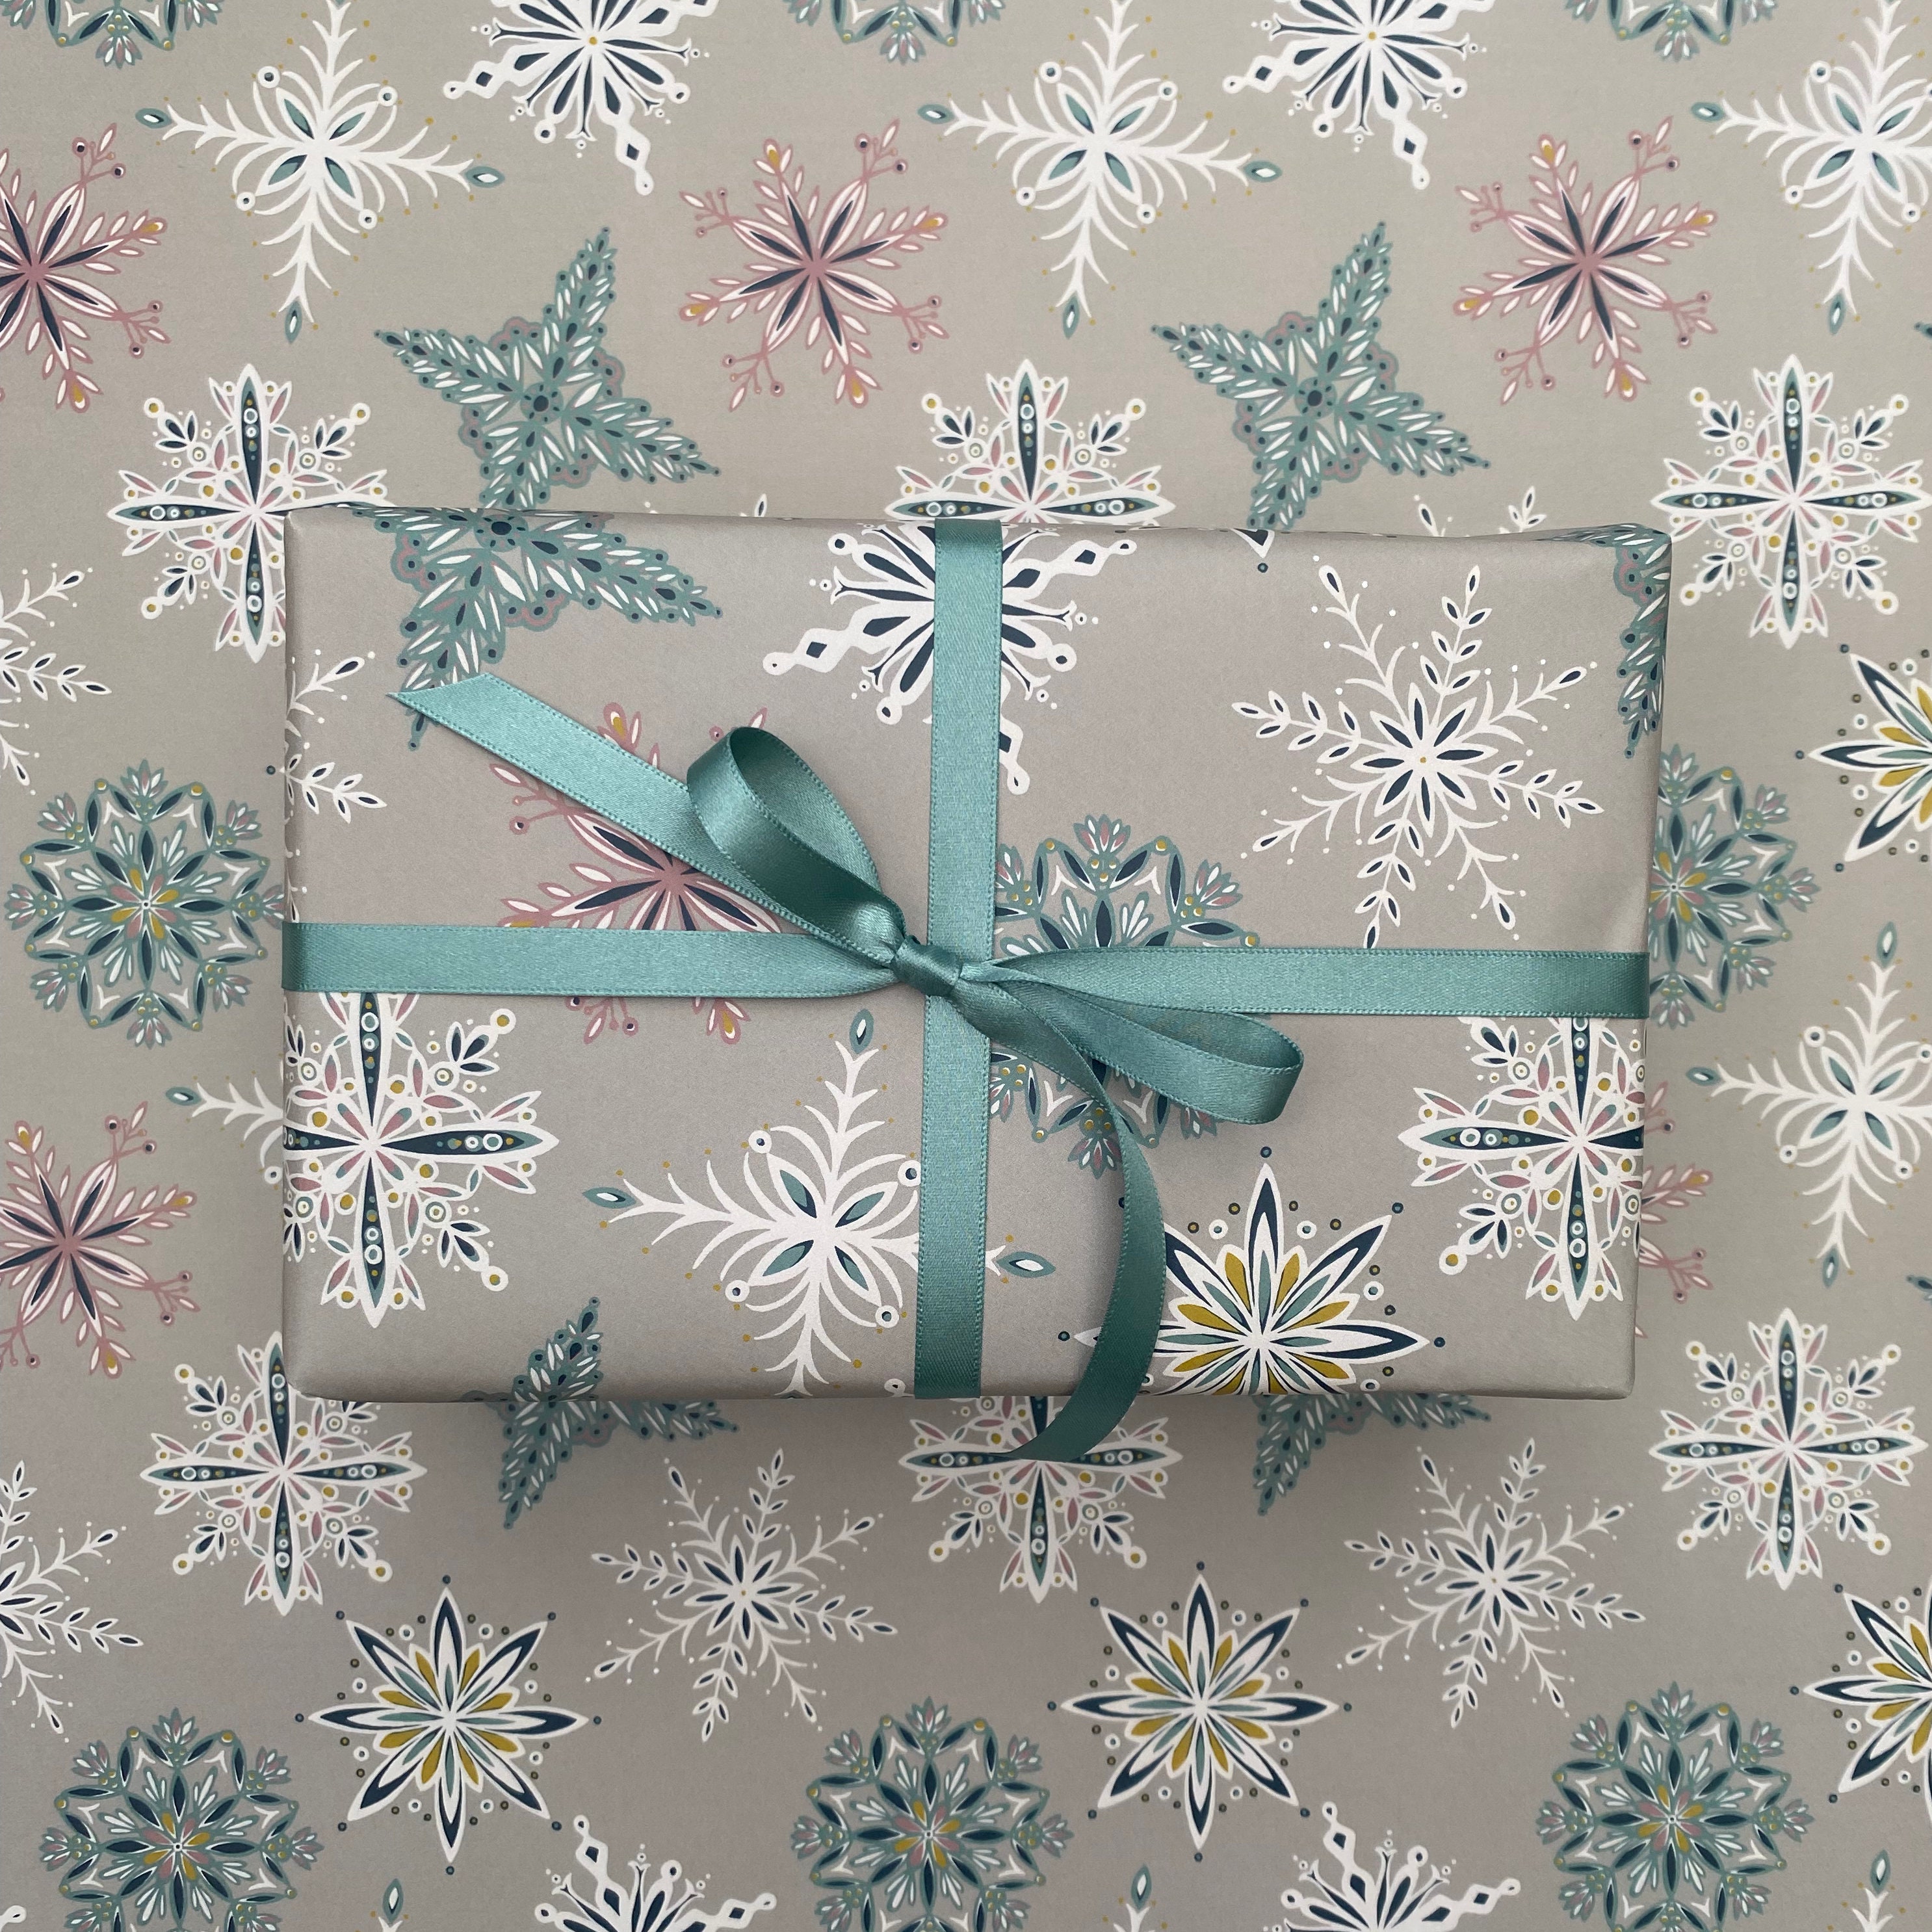 Blue and White Christmas stars and Snowflakes Gift Wrapping Paper Rolls, 1pc